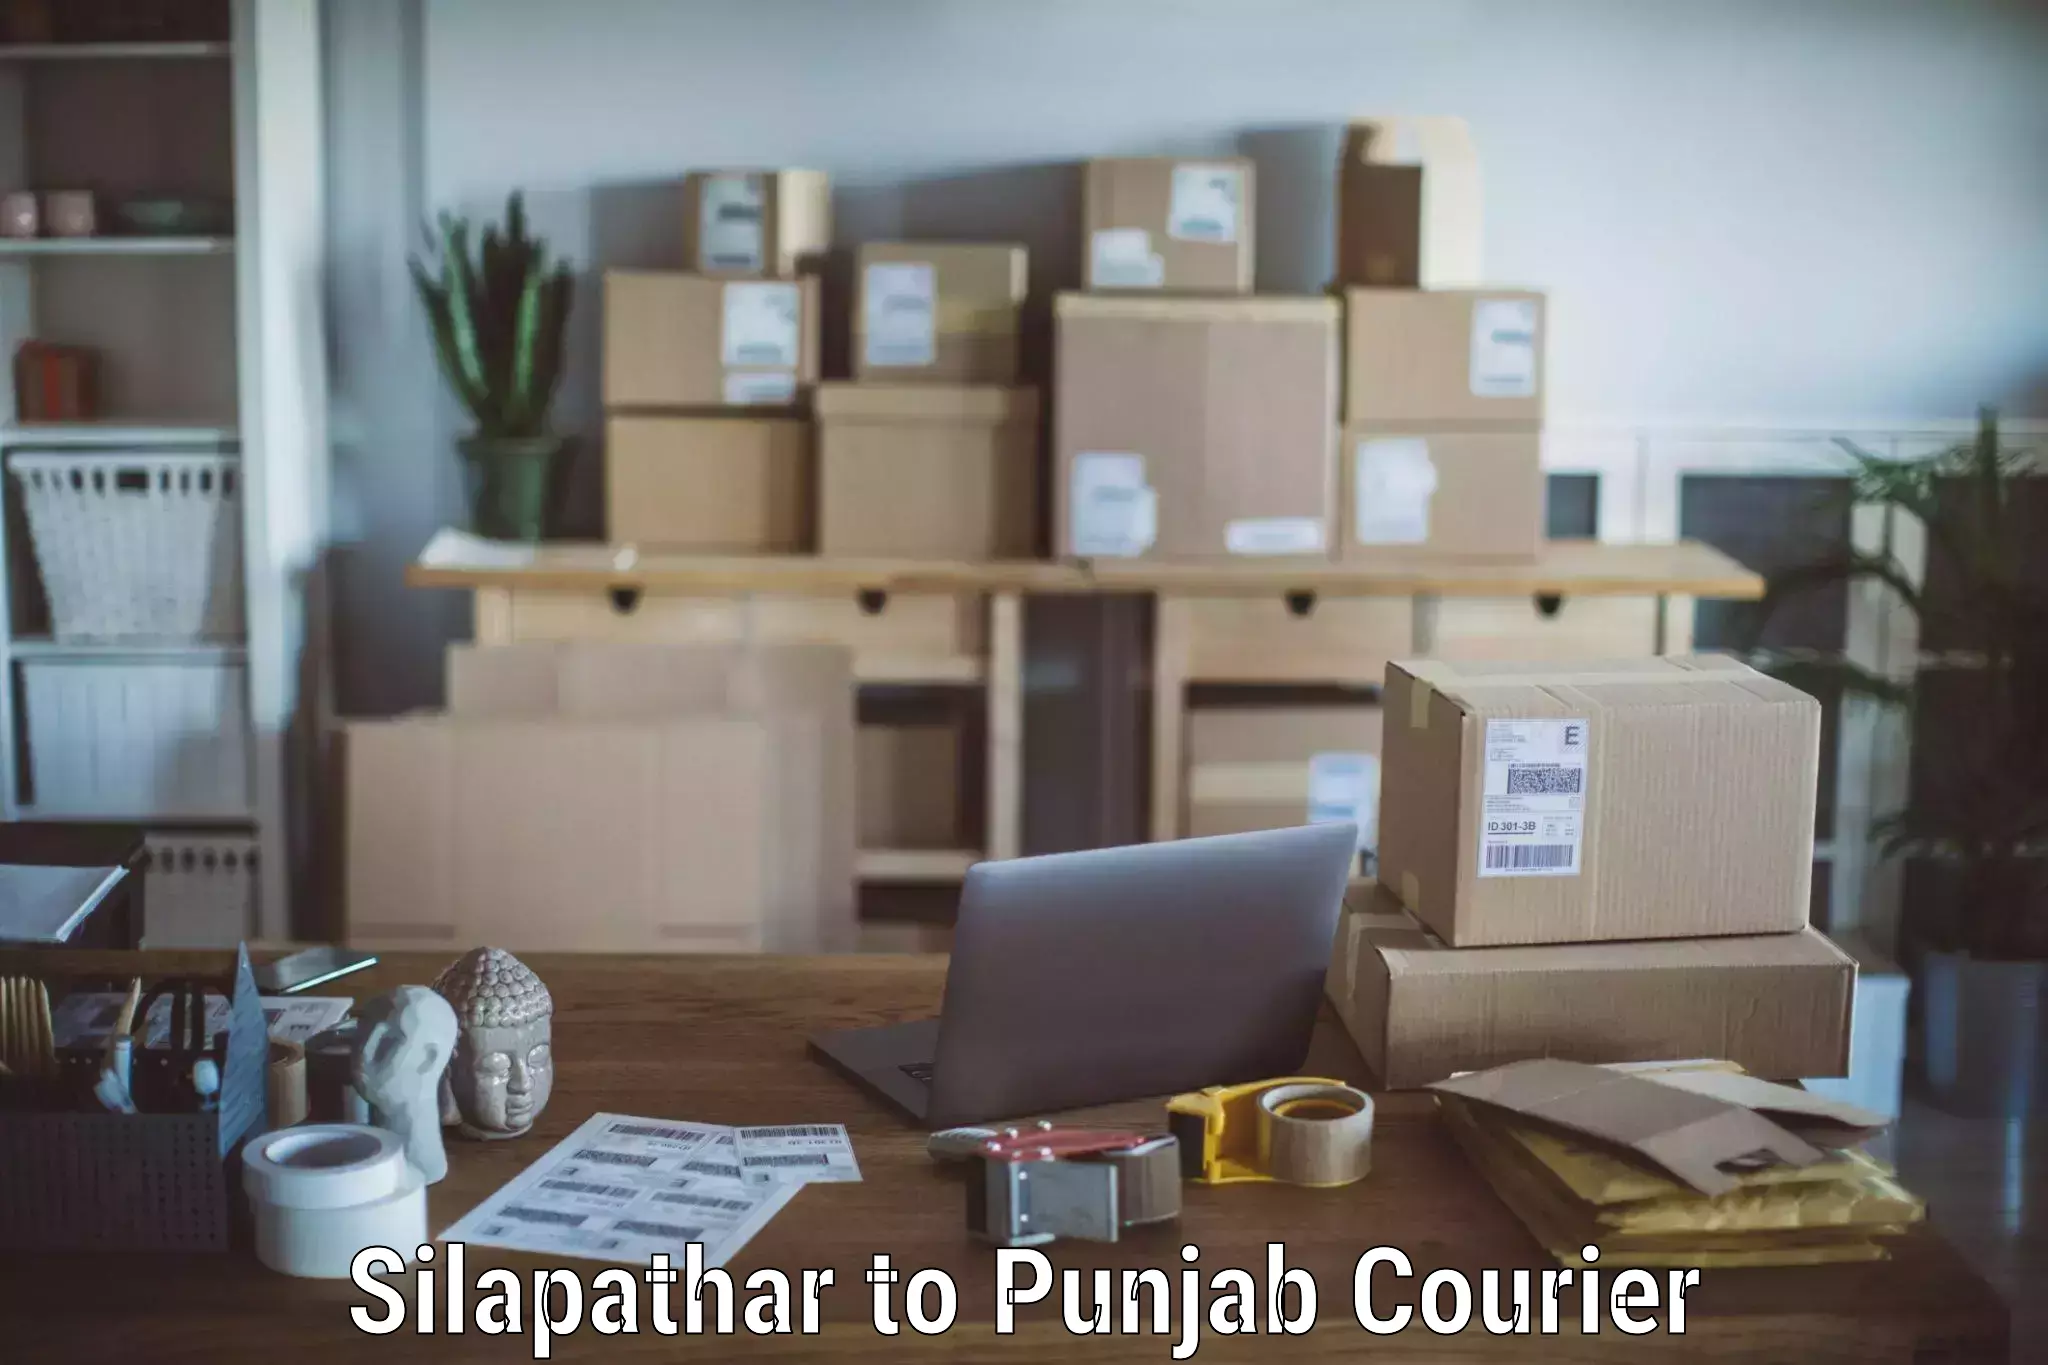 Household goods transport service Silapathar to Begowal